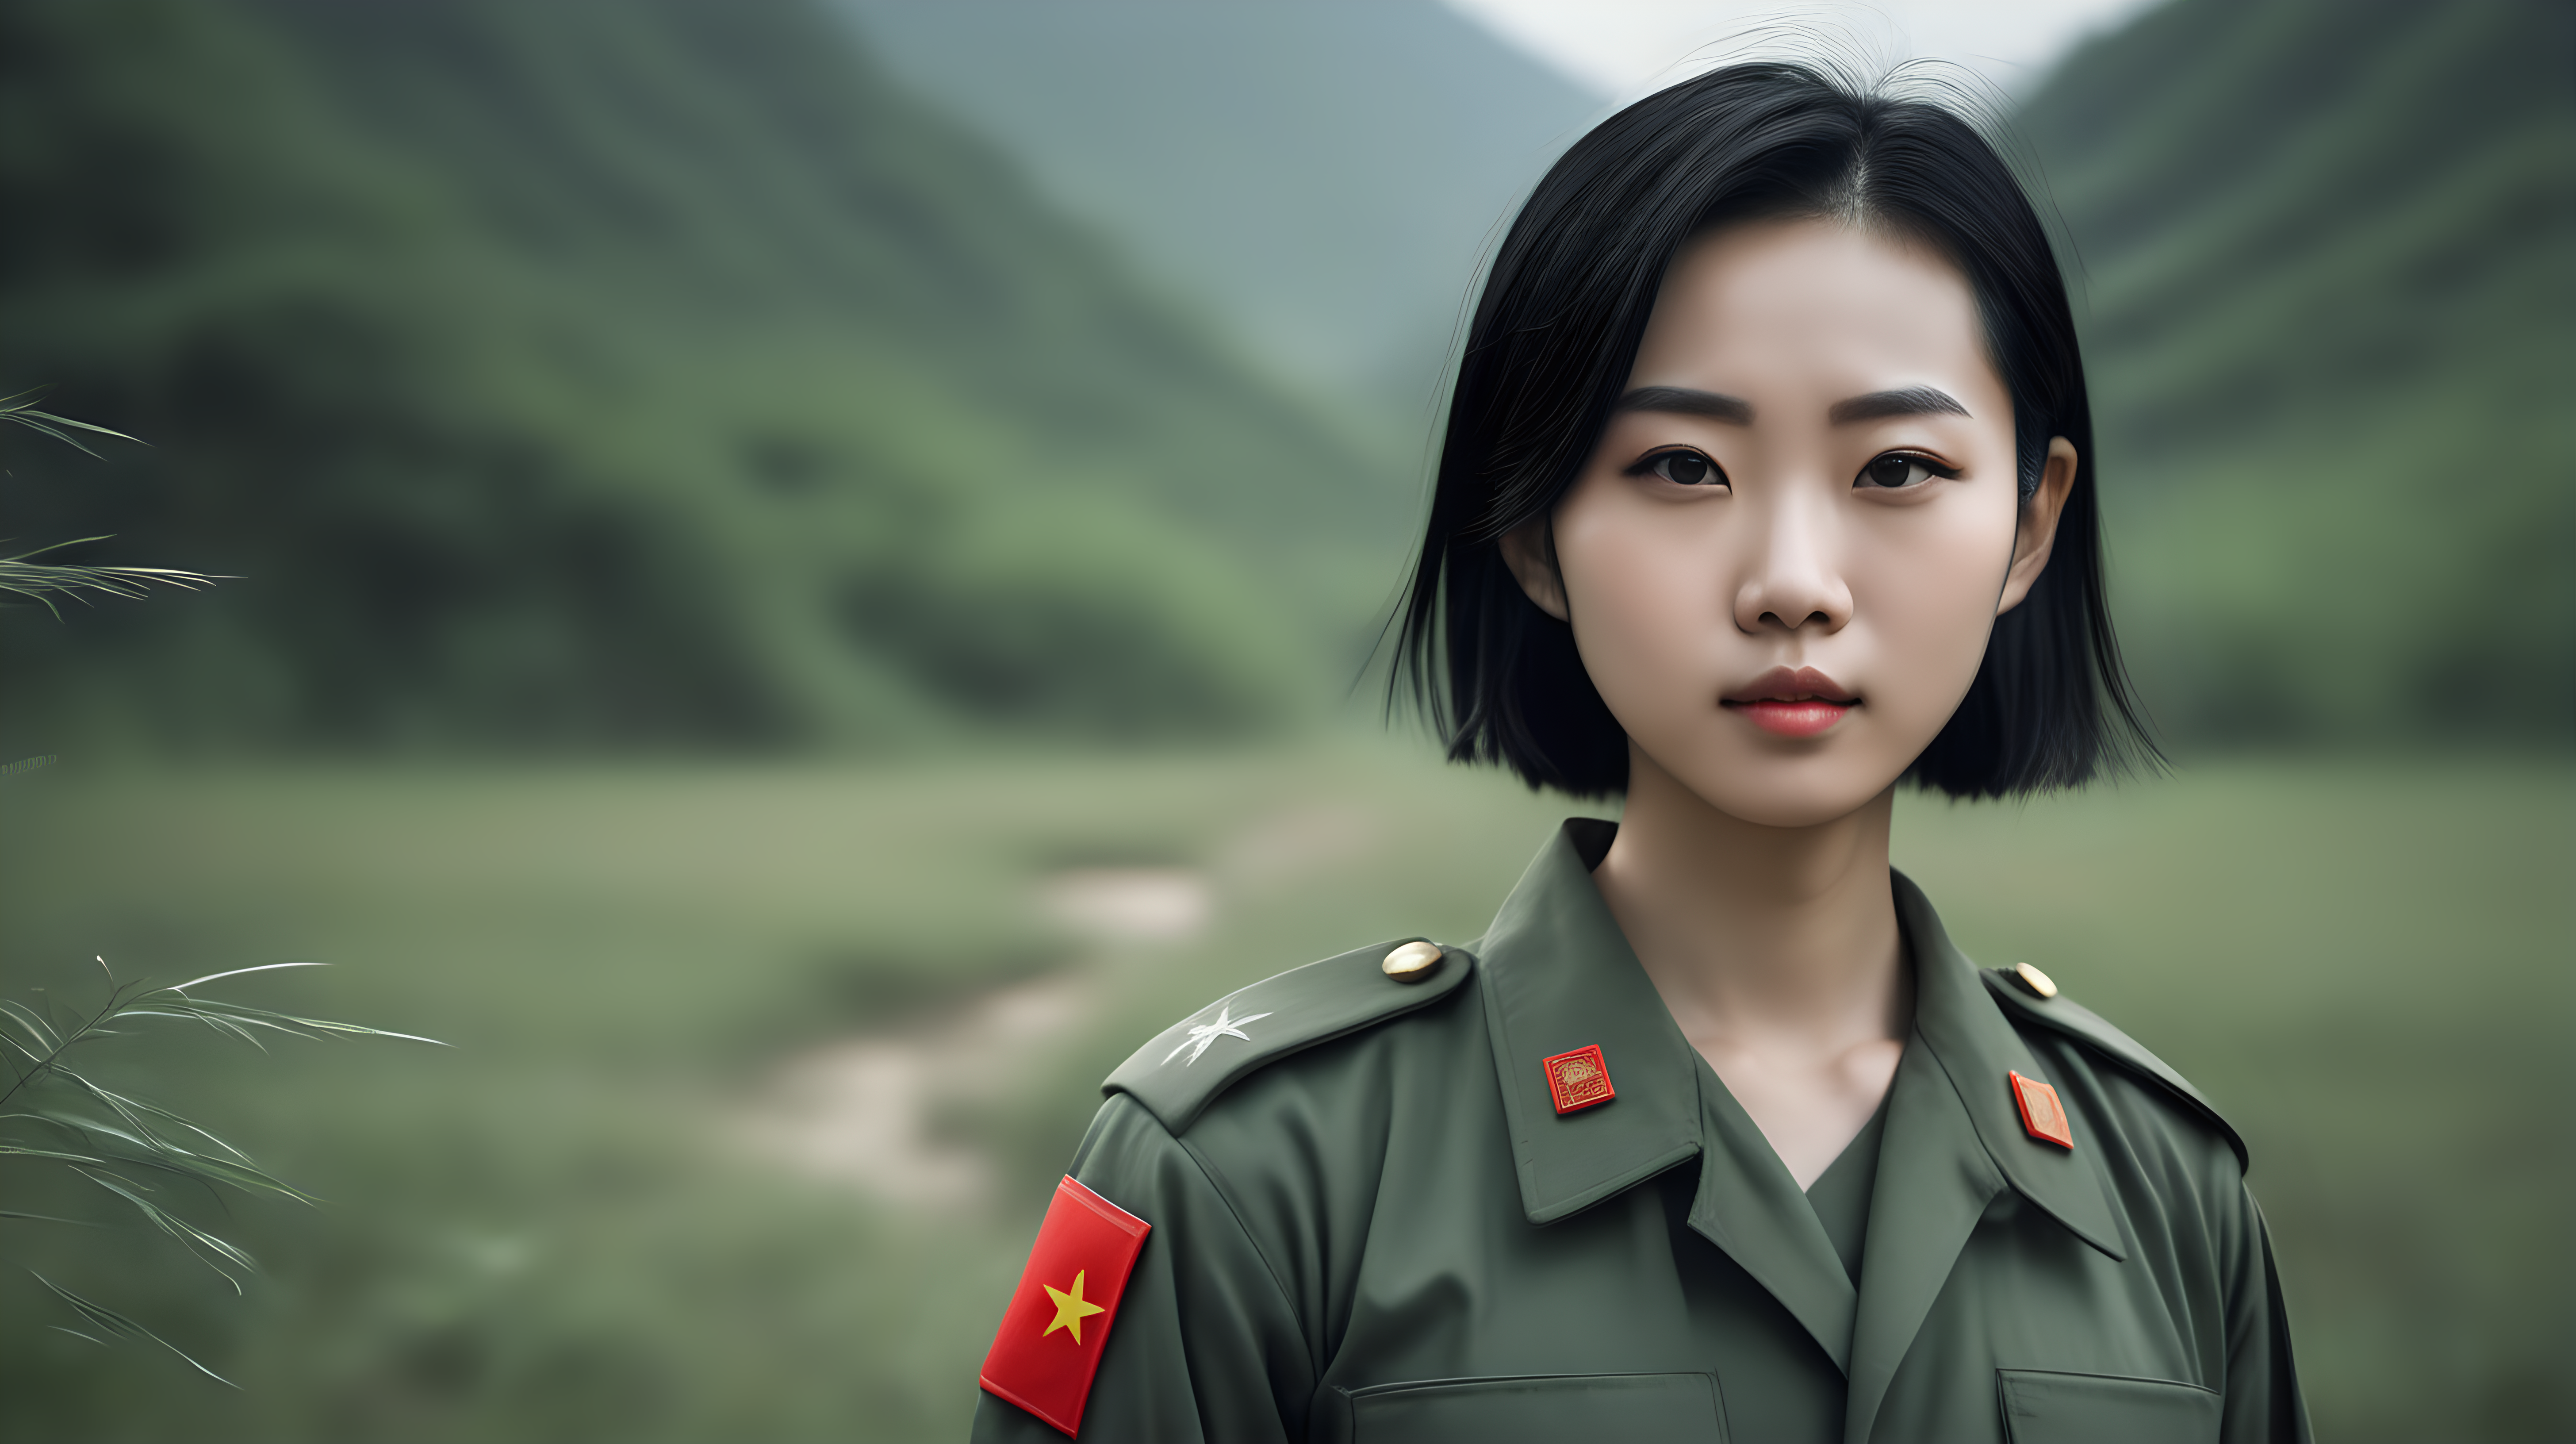 A Chinese medical female soldierYouthBlack hairShort hairStanding in